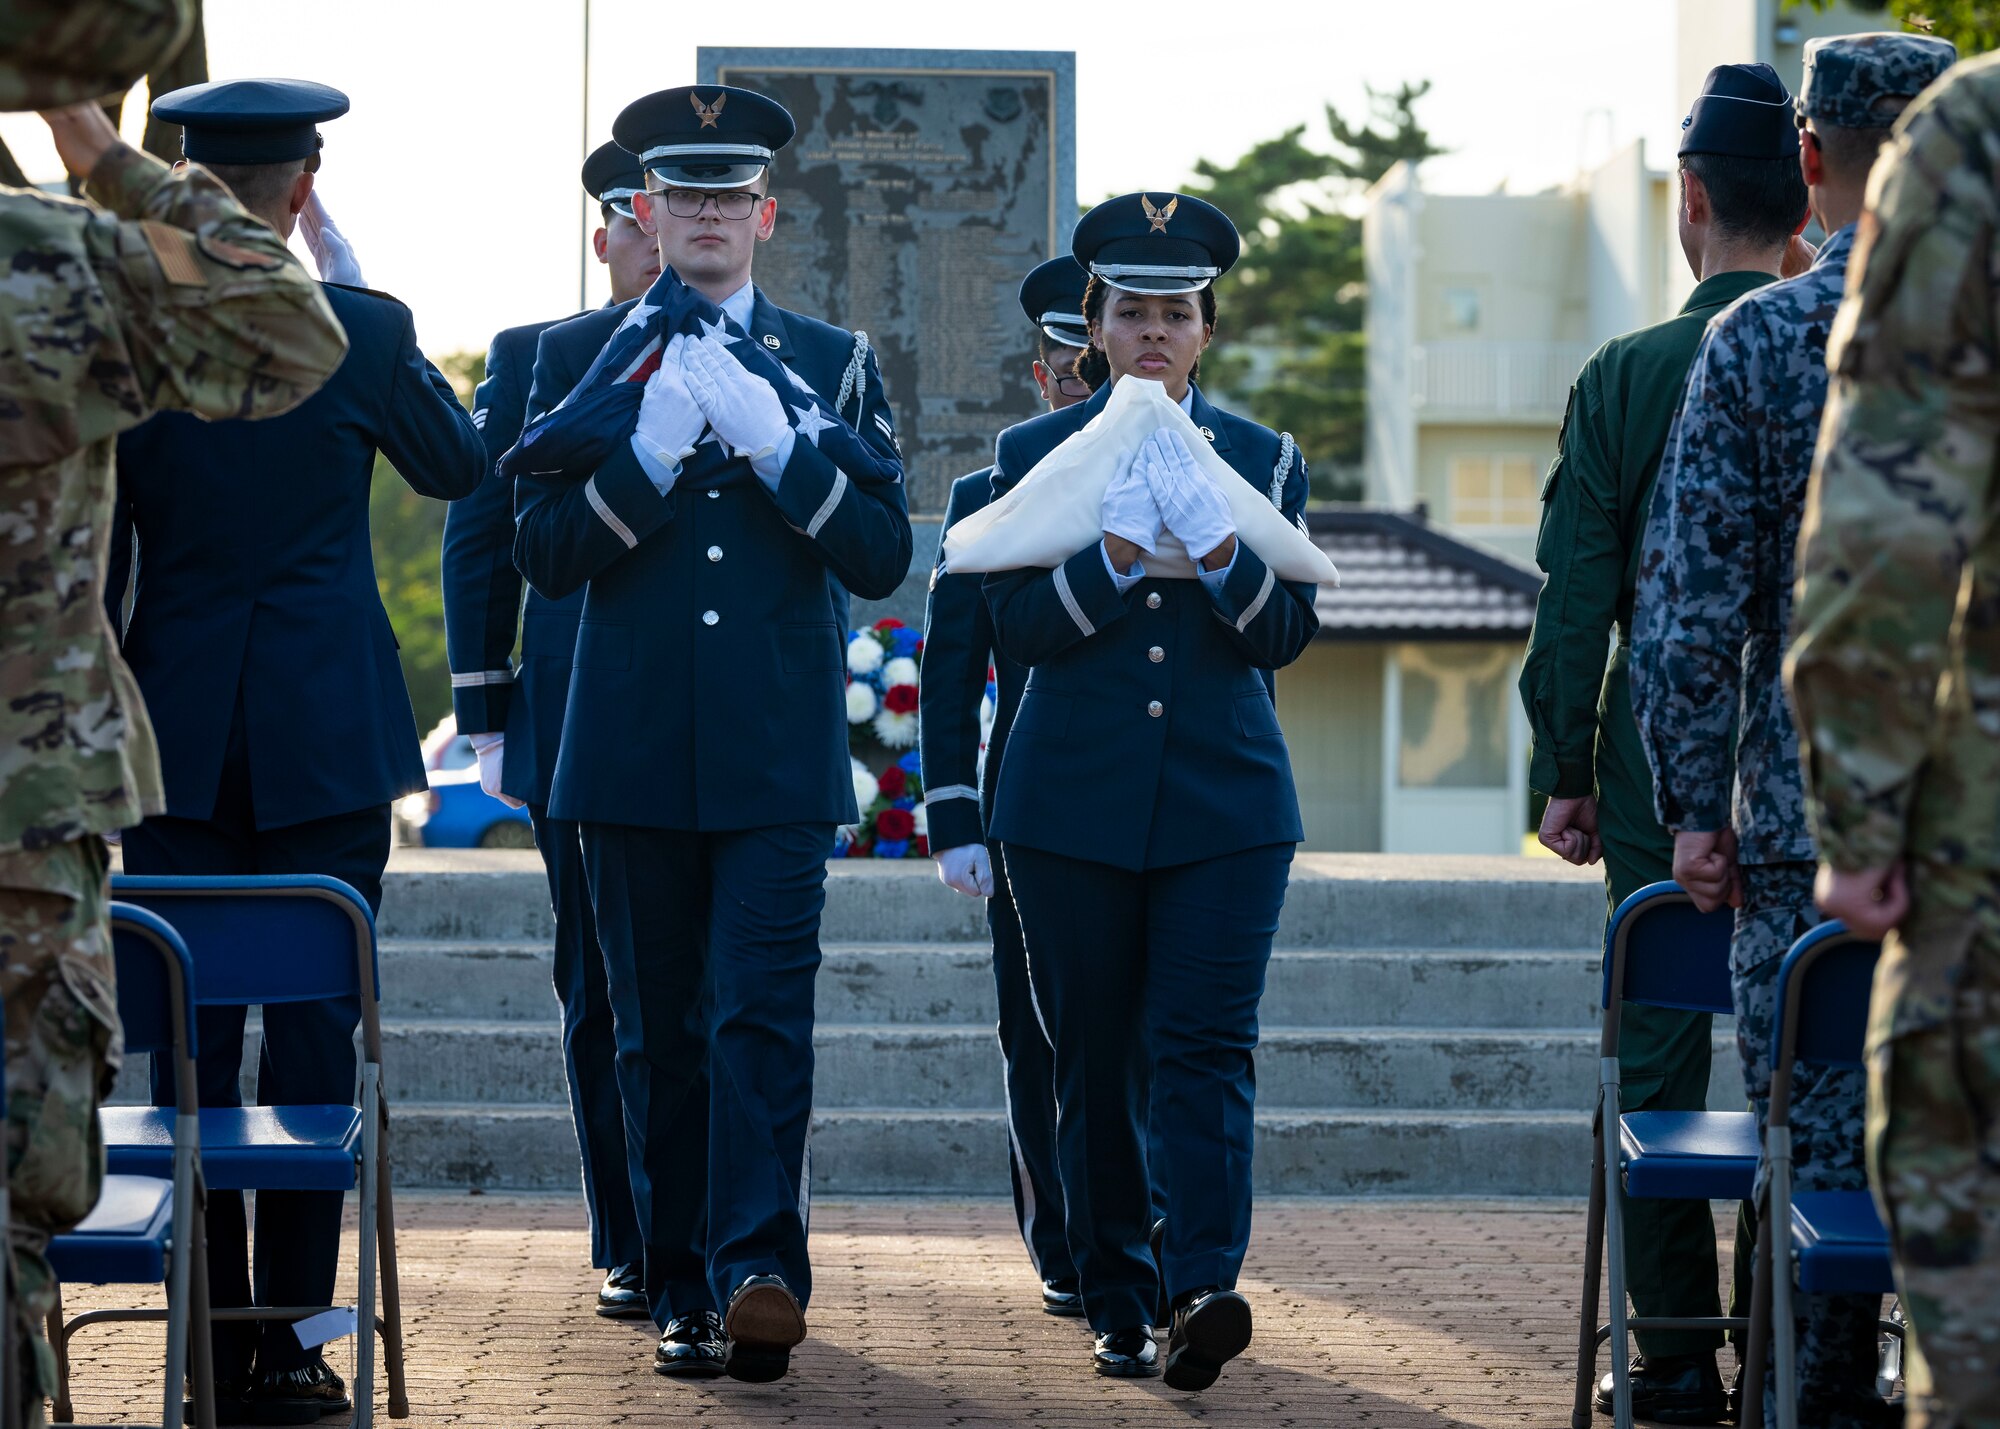 U.S. Air Force members in dress blues walk holding folded flags in their arms